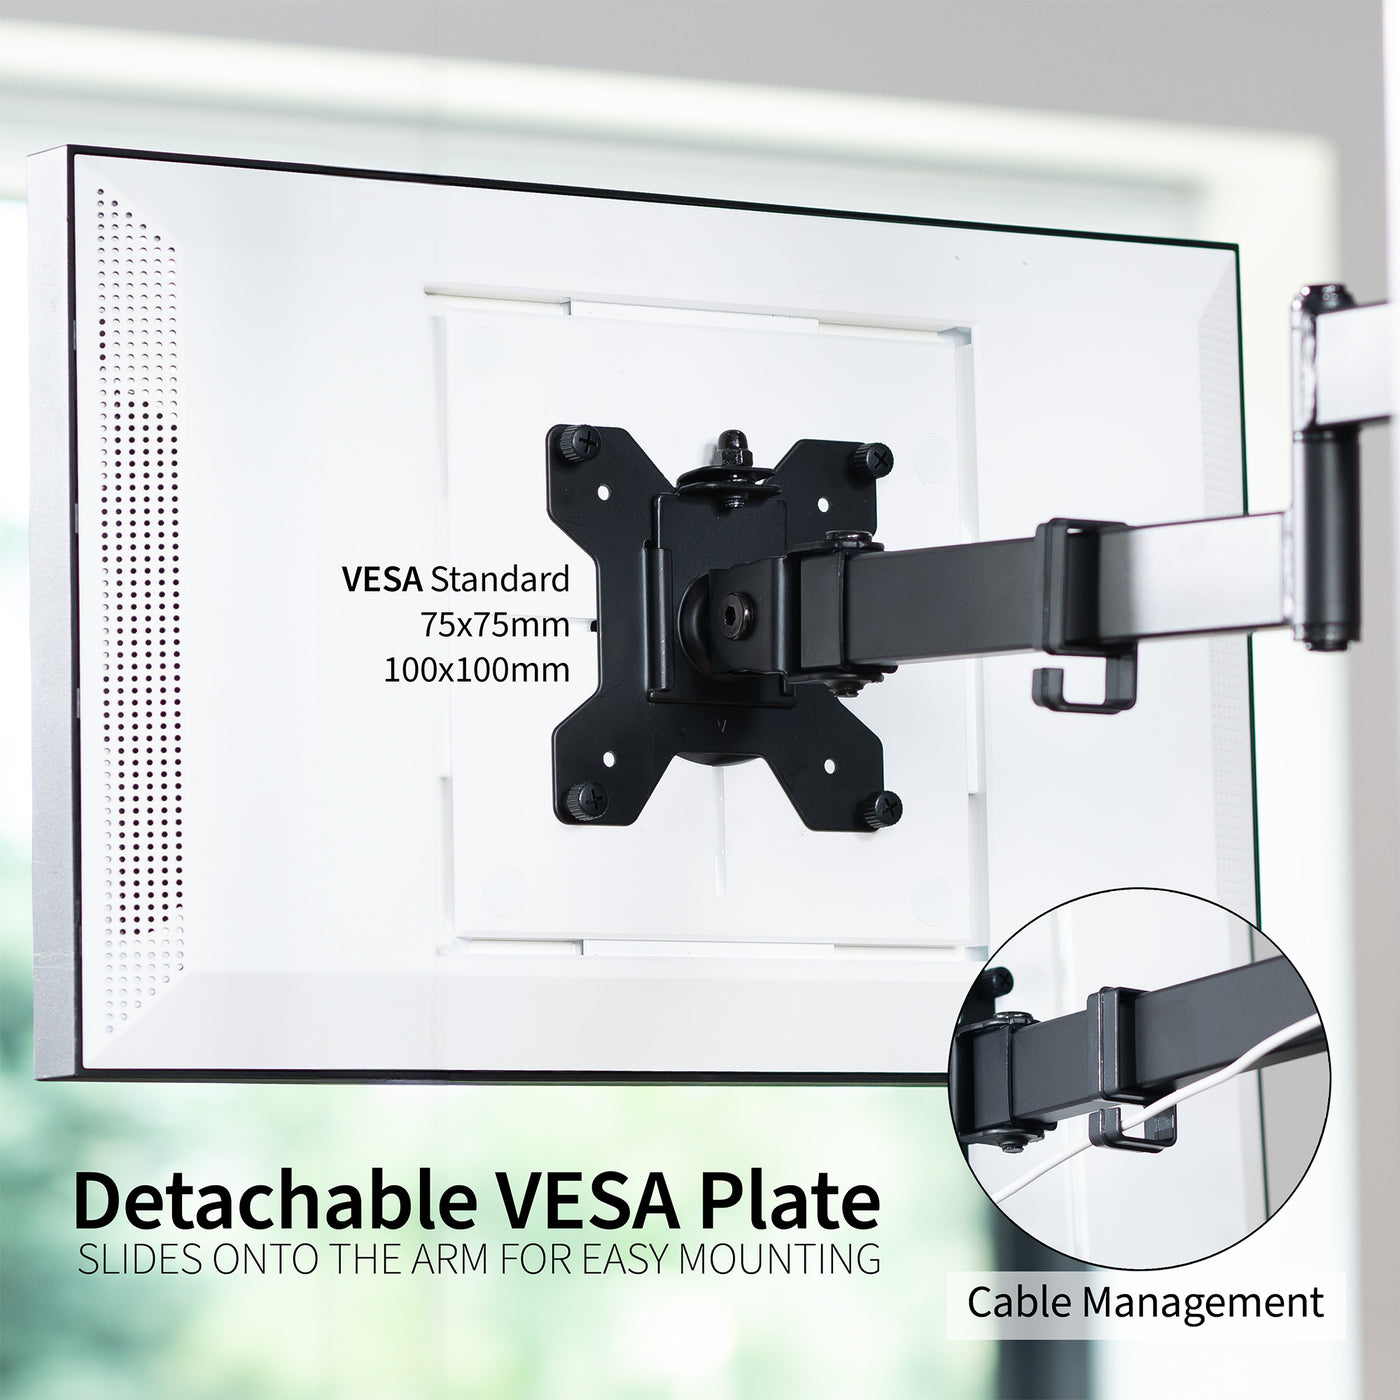 Under cabinet mounted single monitor or TV mount, height adjustable and articulating with built-in cable management. Simple installation with all necessary hardware included.